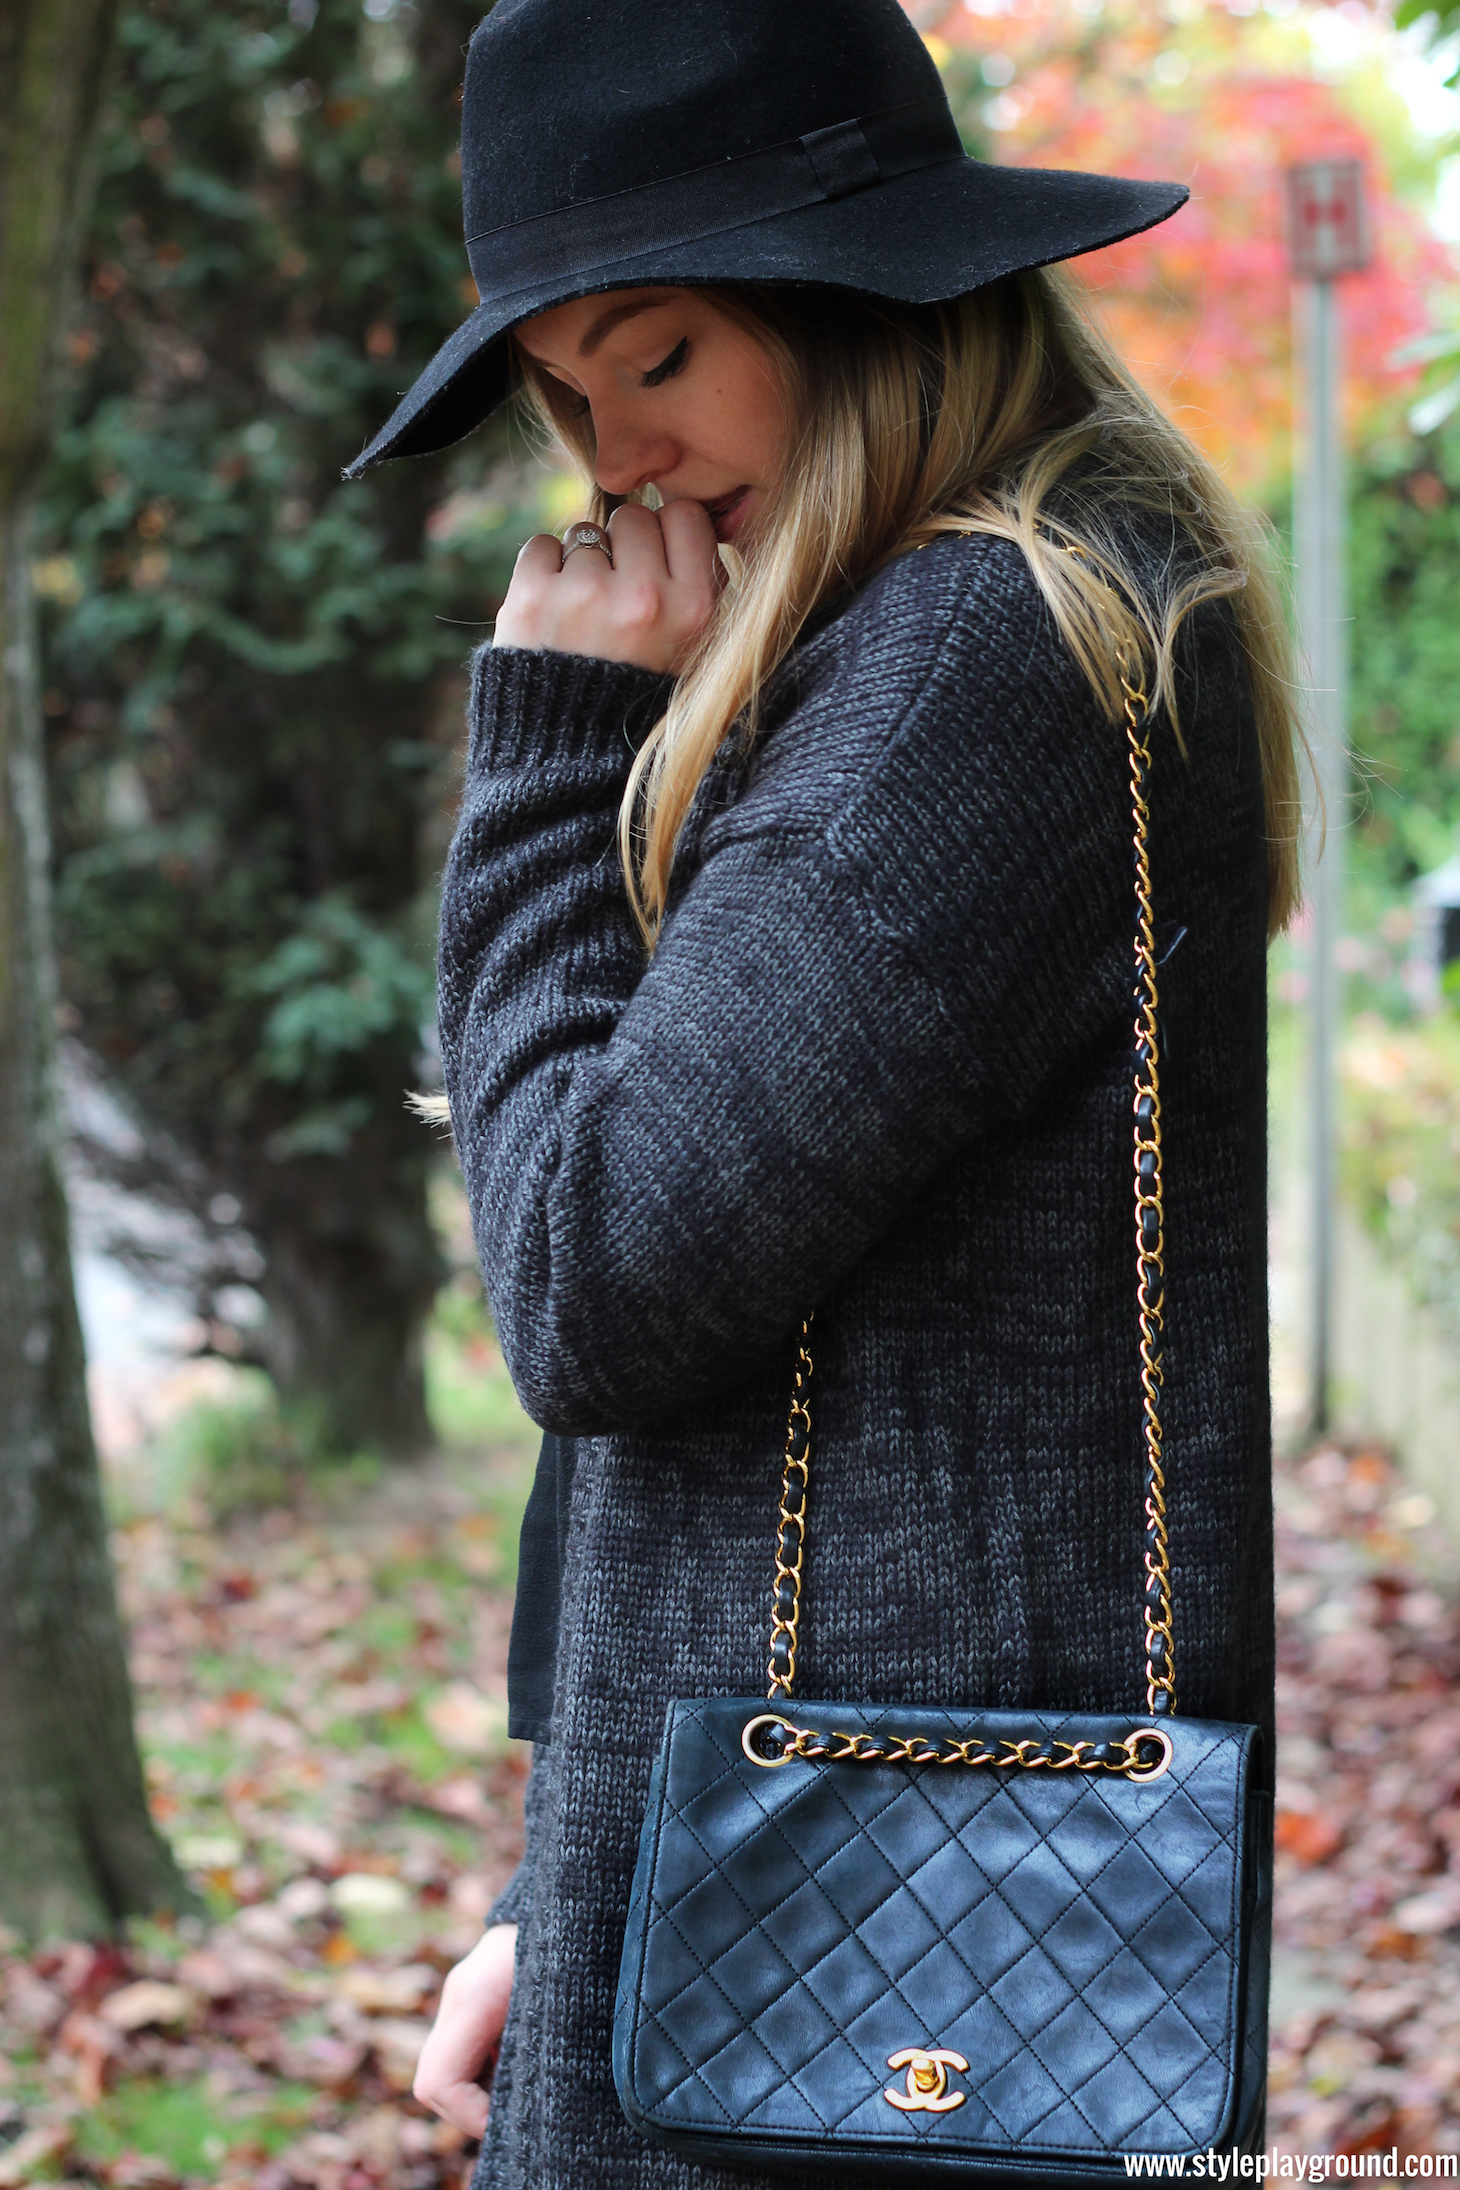 Wearable stories cardigan • Zara top & jeans • Vintage Chanel bag • Acne pistol boots • H&M hat via Style playground